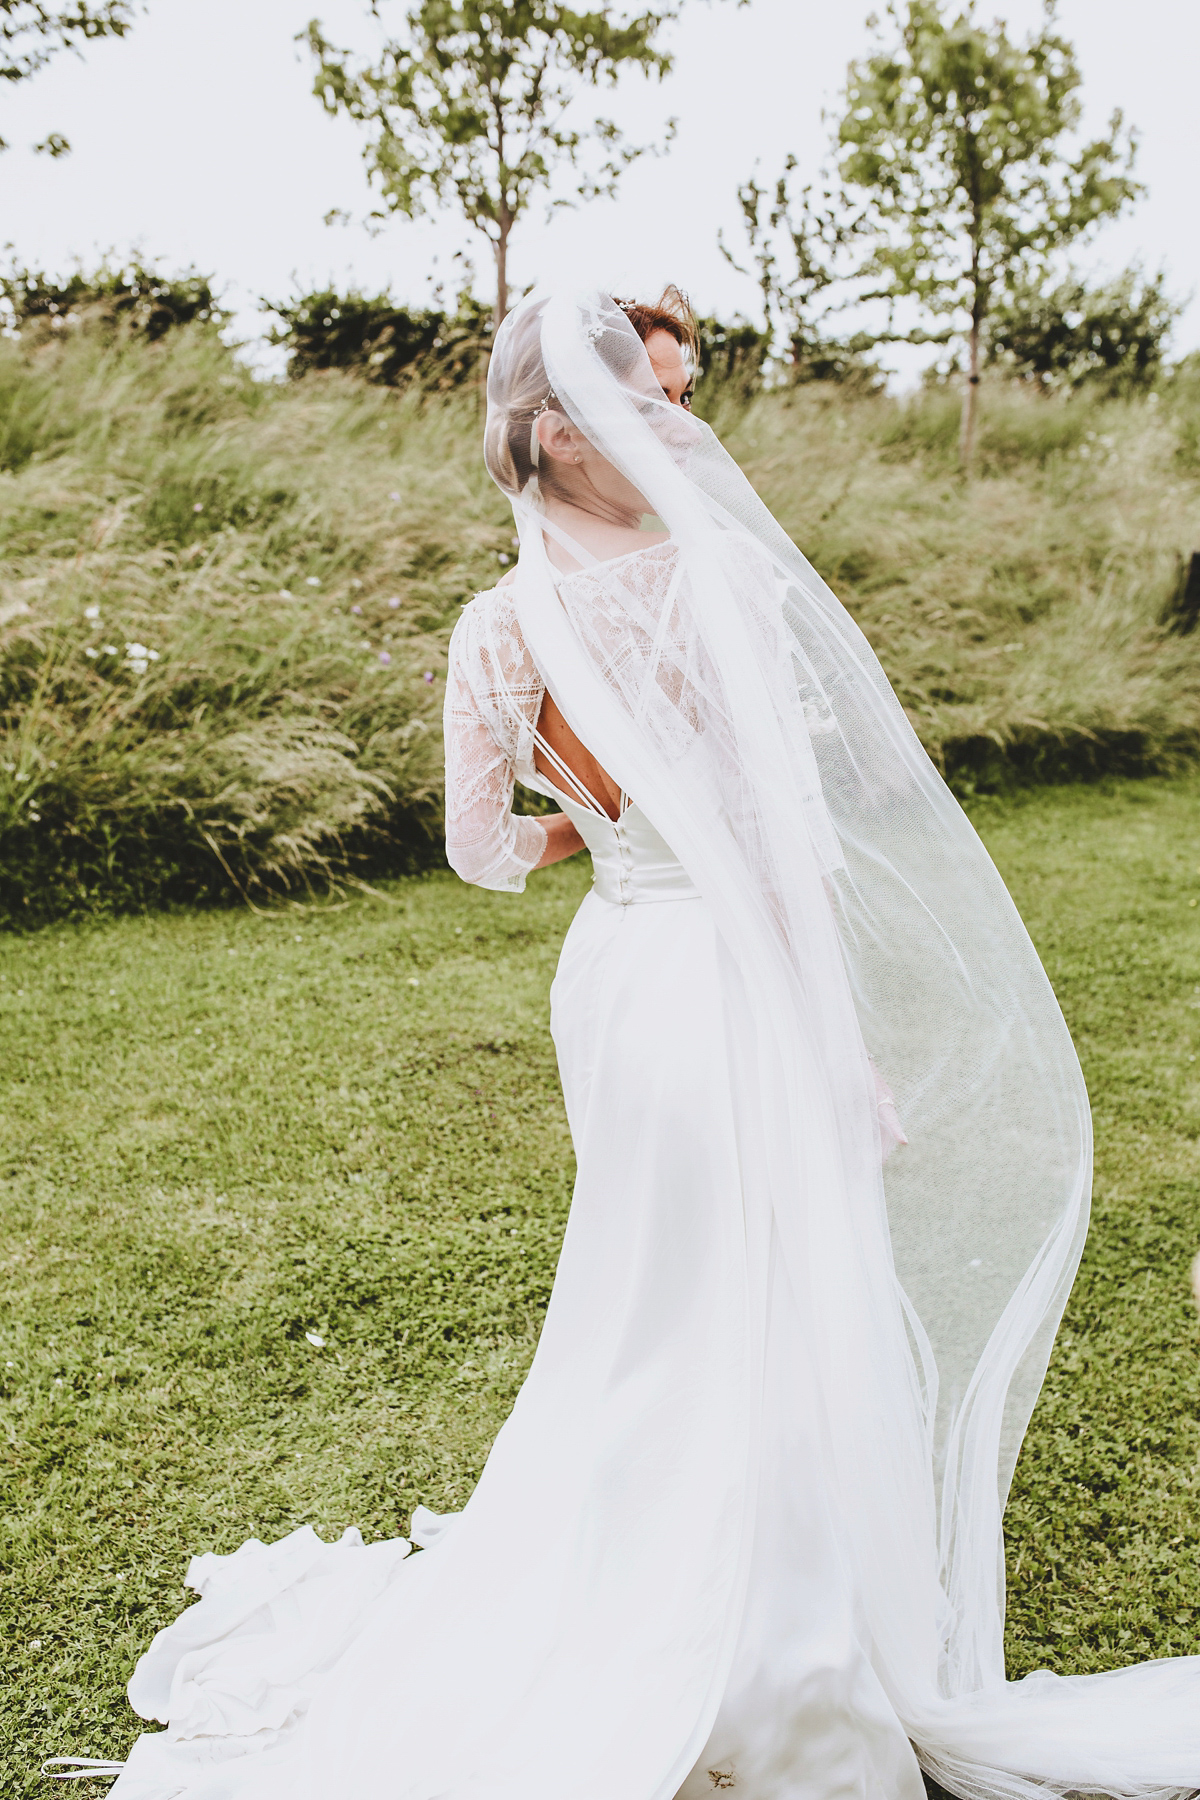 Chrissie wore a Stephanie Allin gown for her wedding at Cripps Barn in the Cotswolds. Photography by Frankee Victoria.